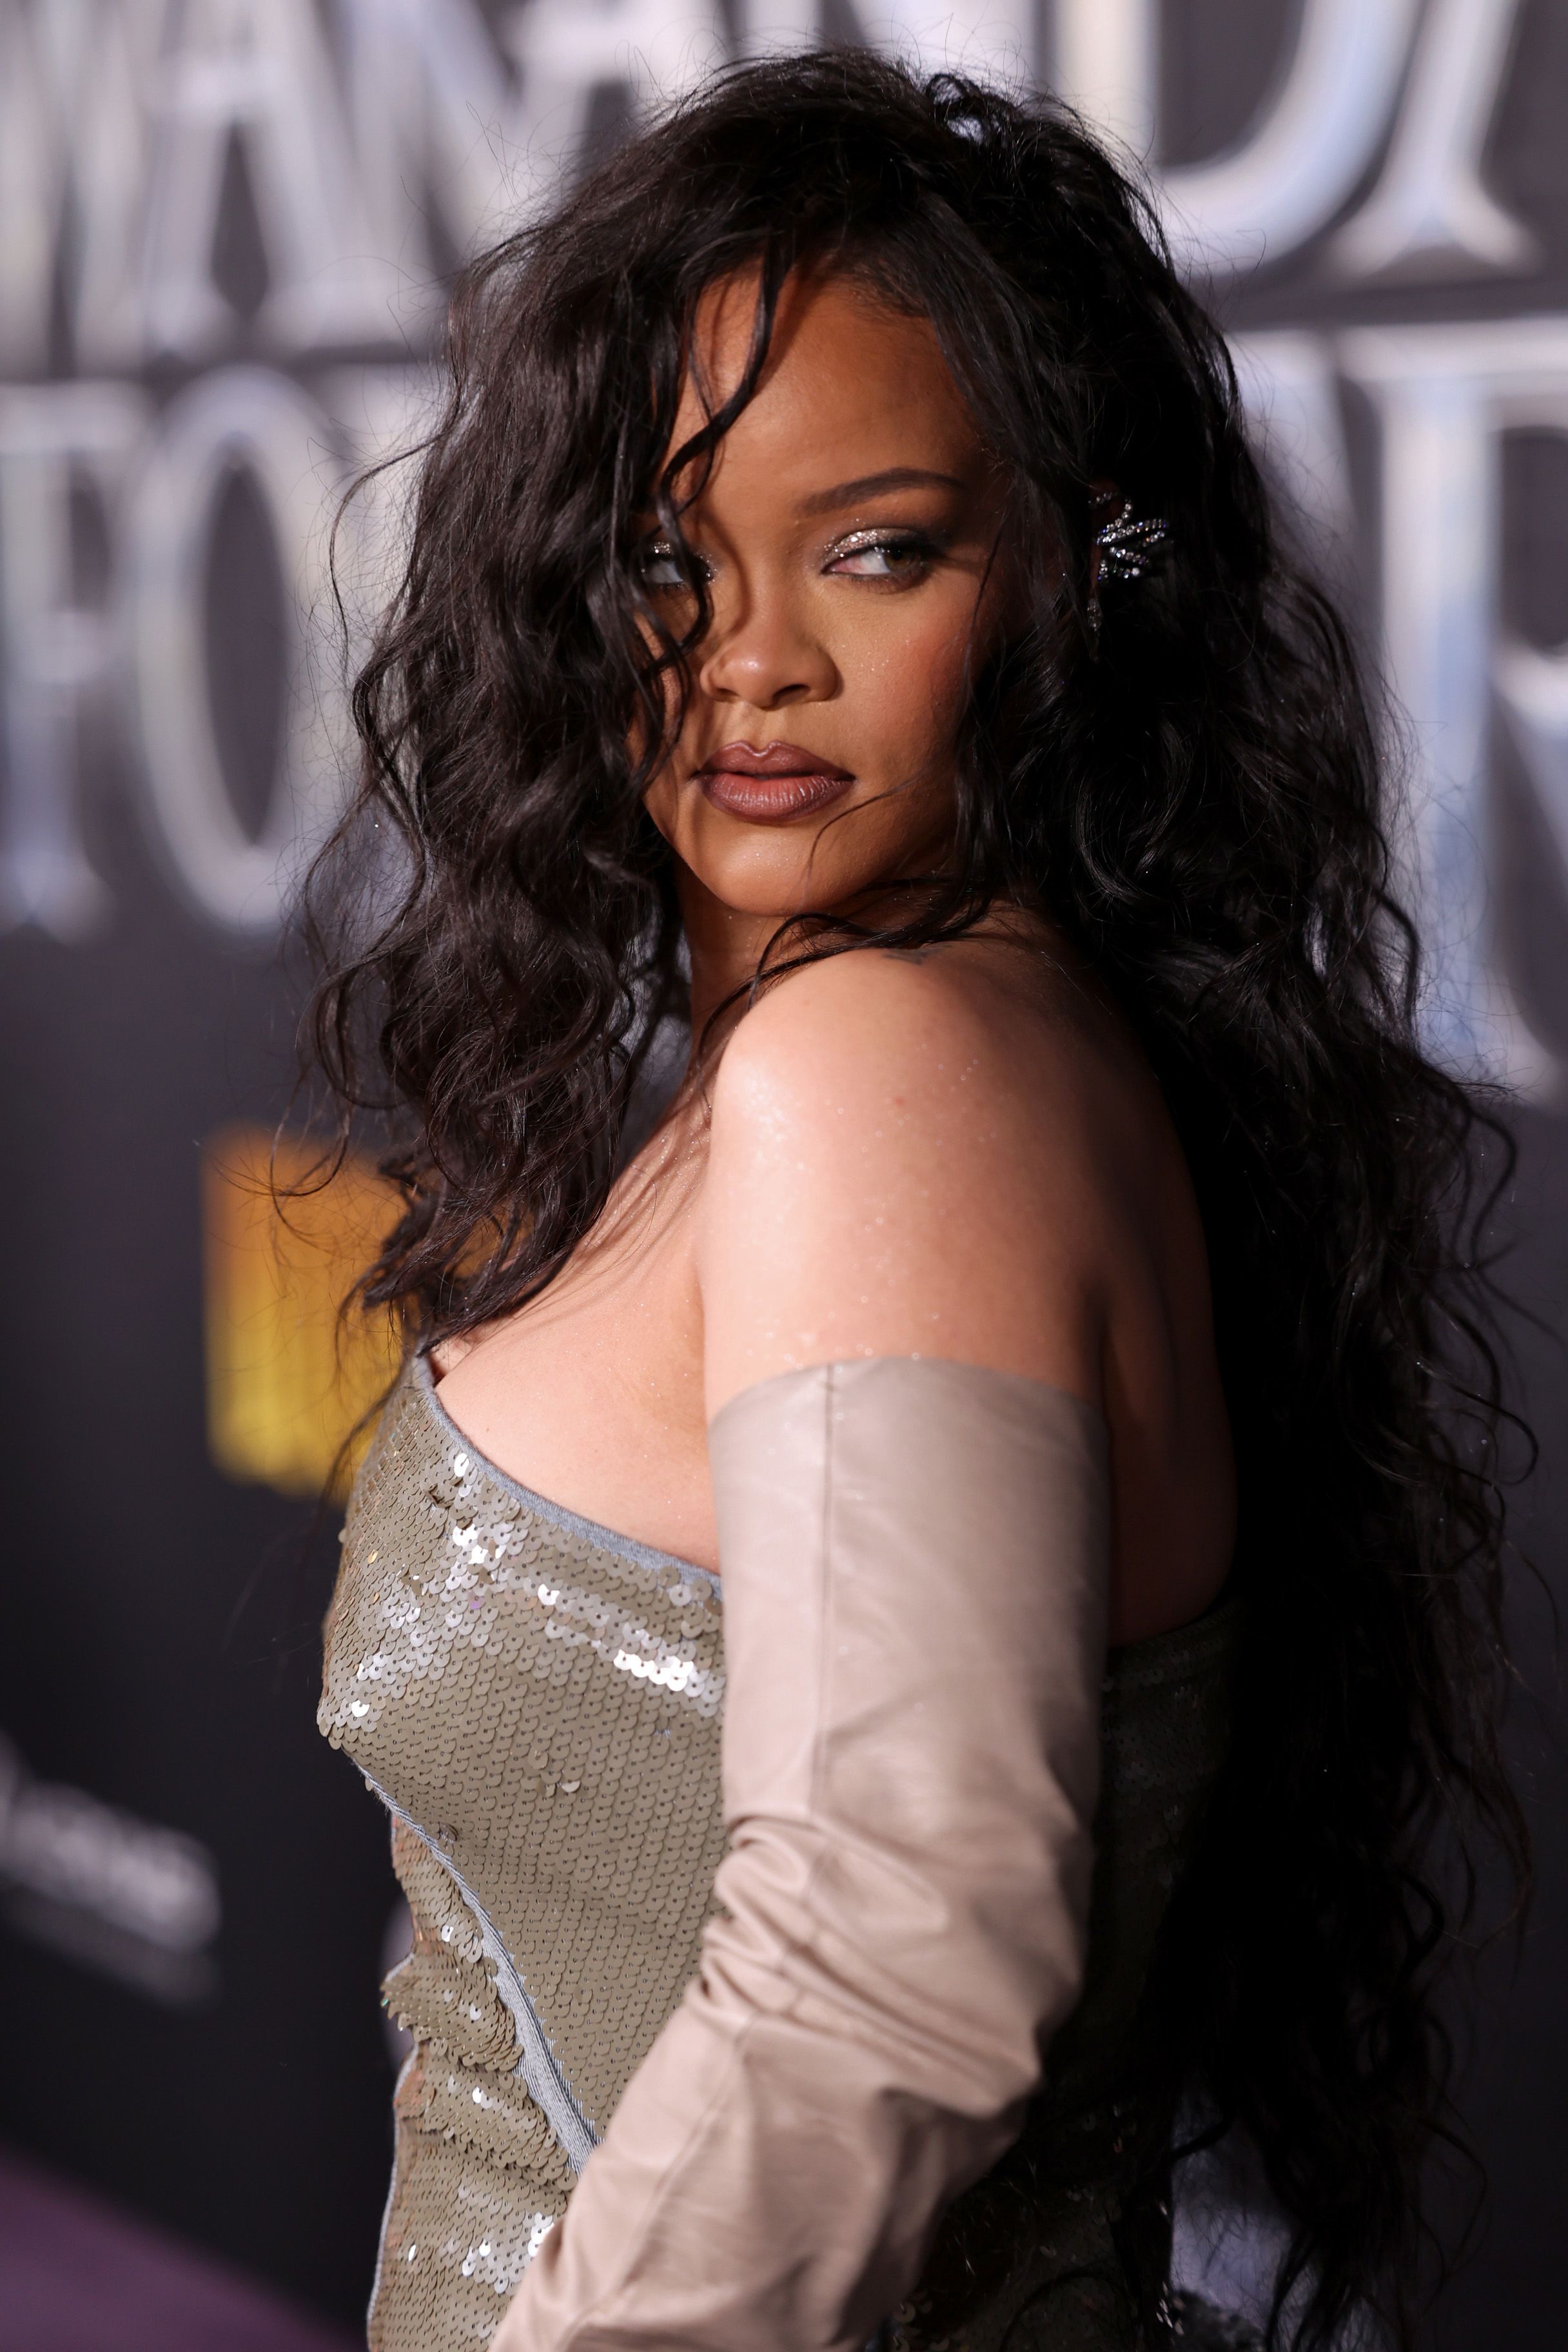 Rihanna at the "Black Panther: Wakanda Forever" world premiere at the El Capitan Theatre in Hollywood, California on October 26, 2022 | Source: Getty Images